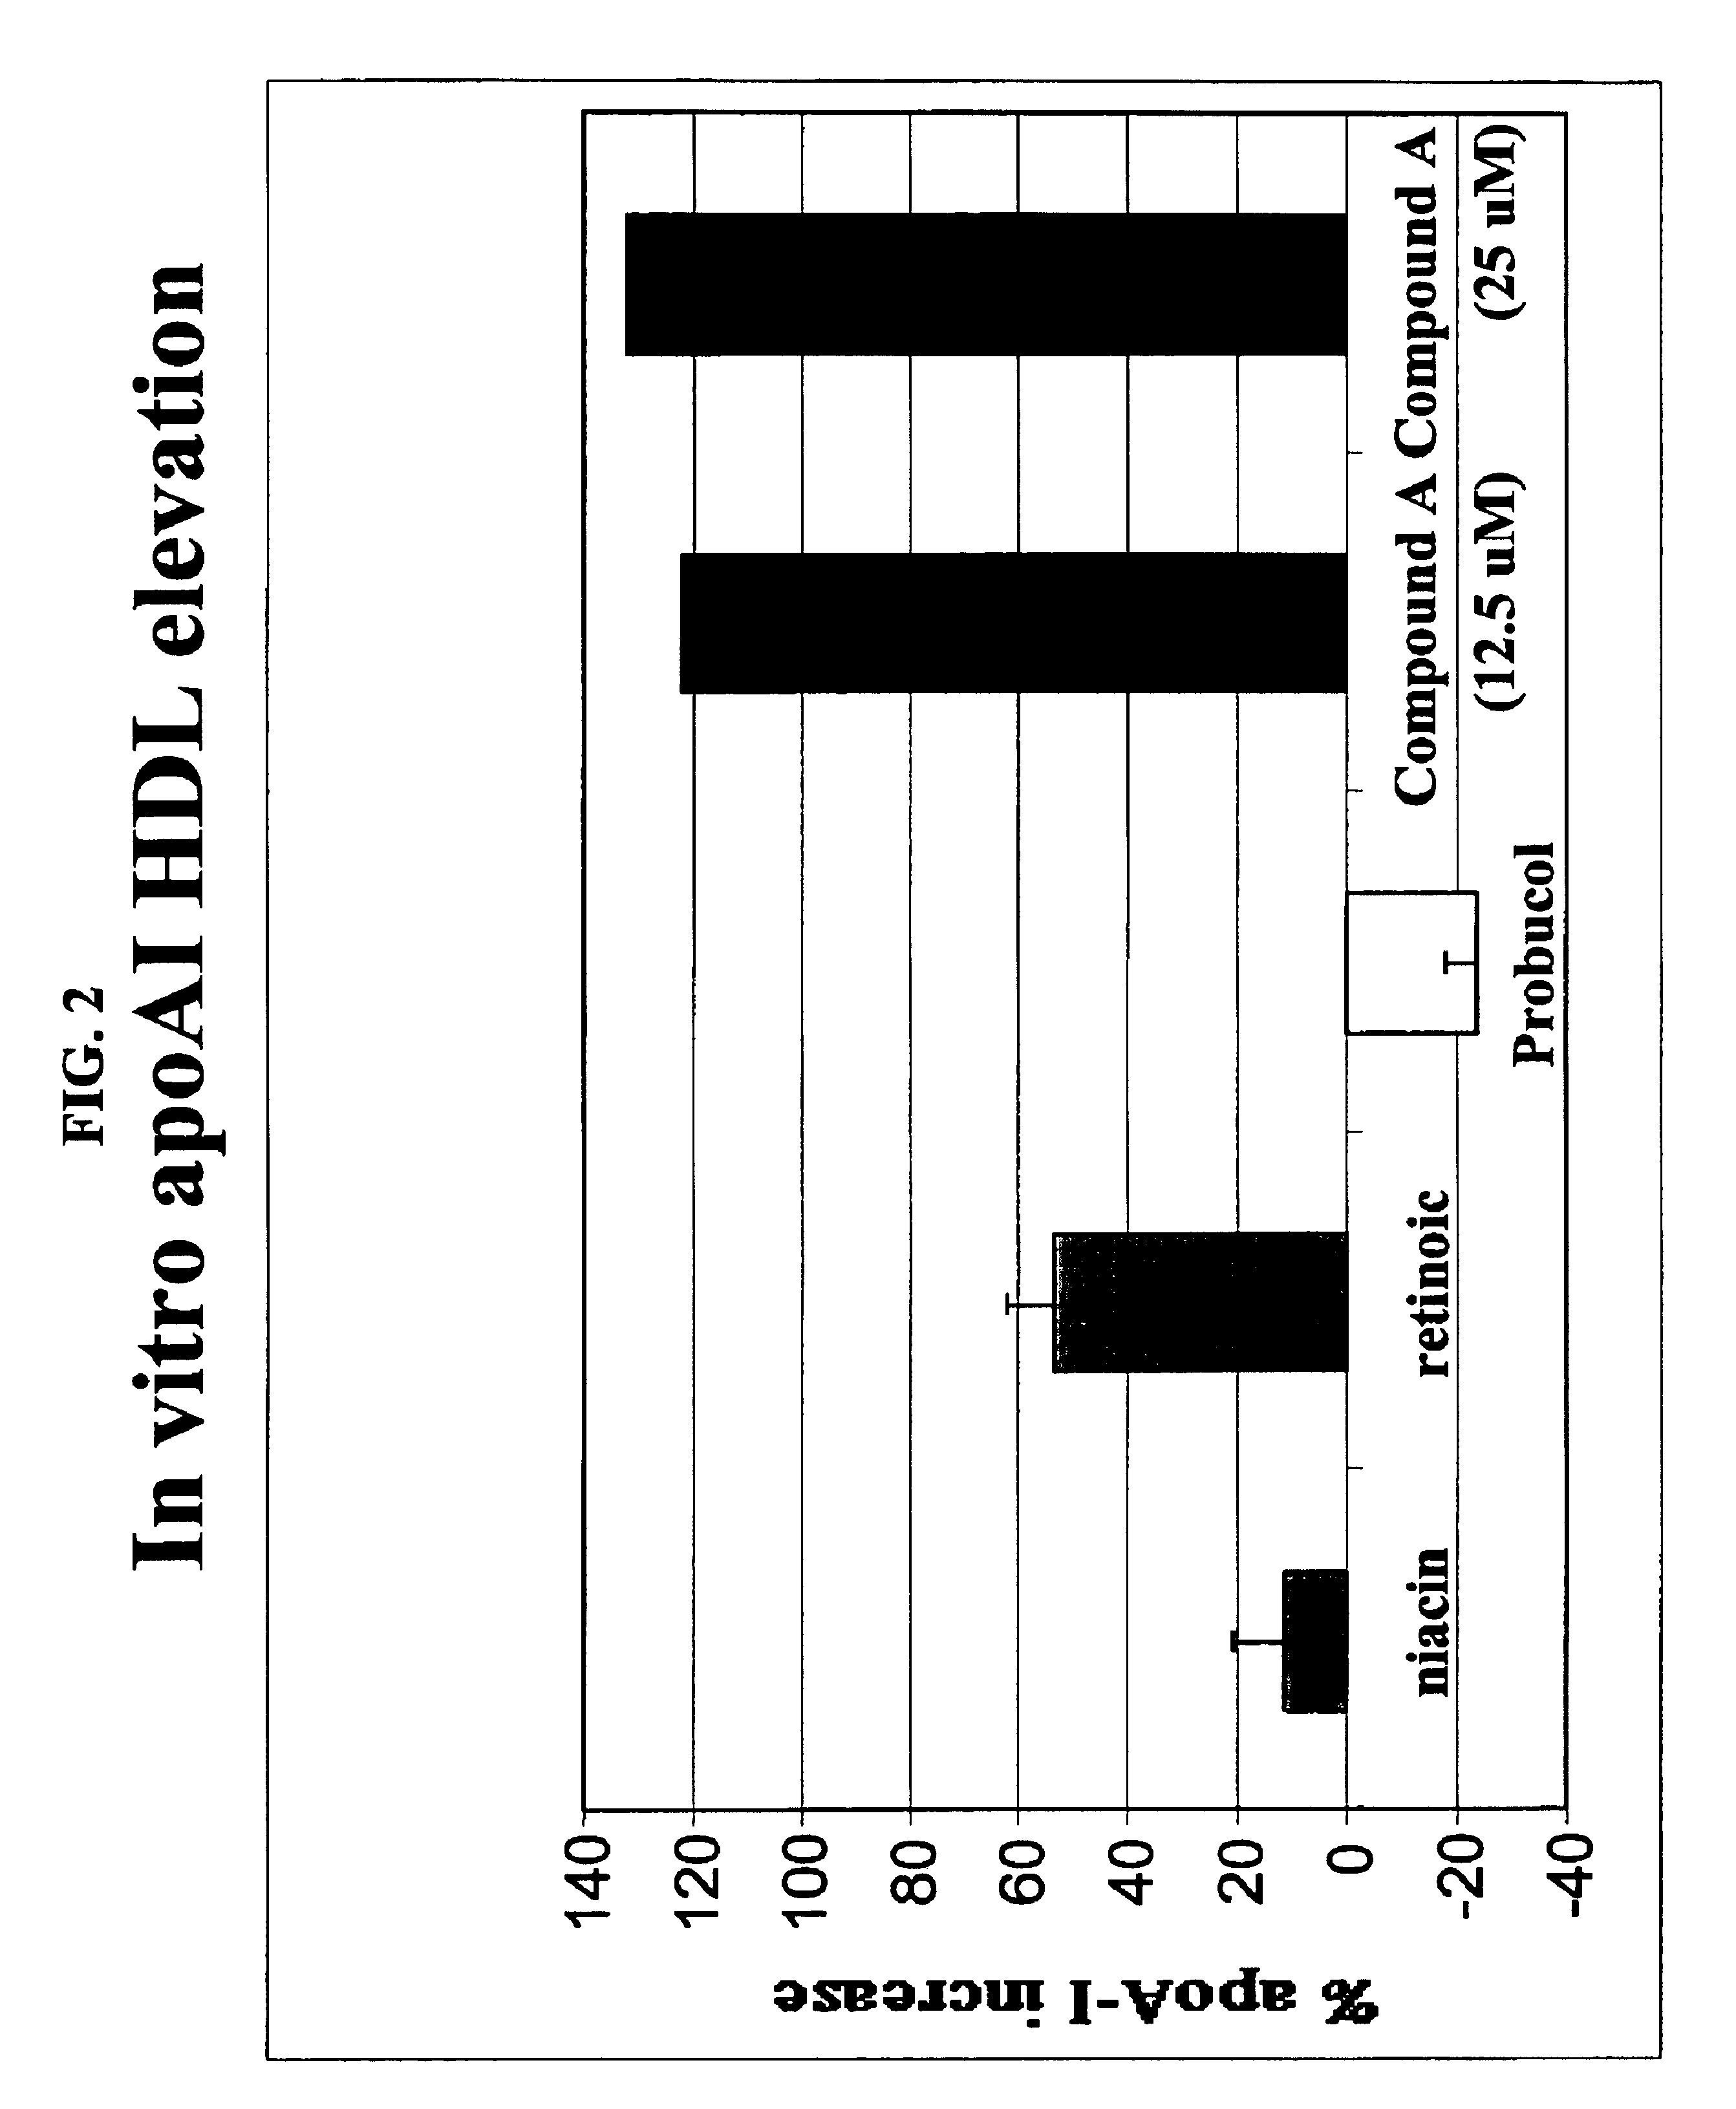 Compounds and methods to increase plasma HDL cholesterol levels and improve HDL functionality